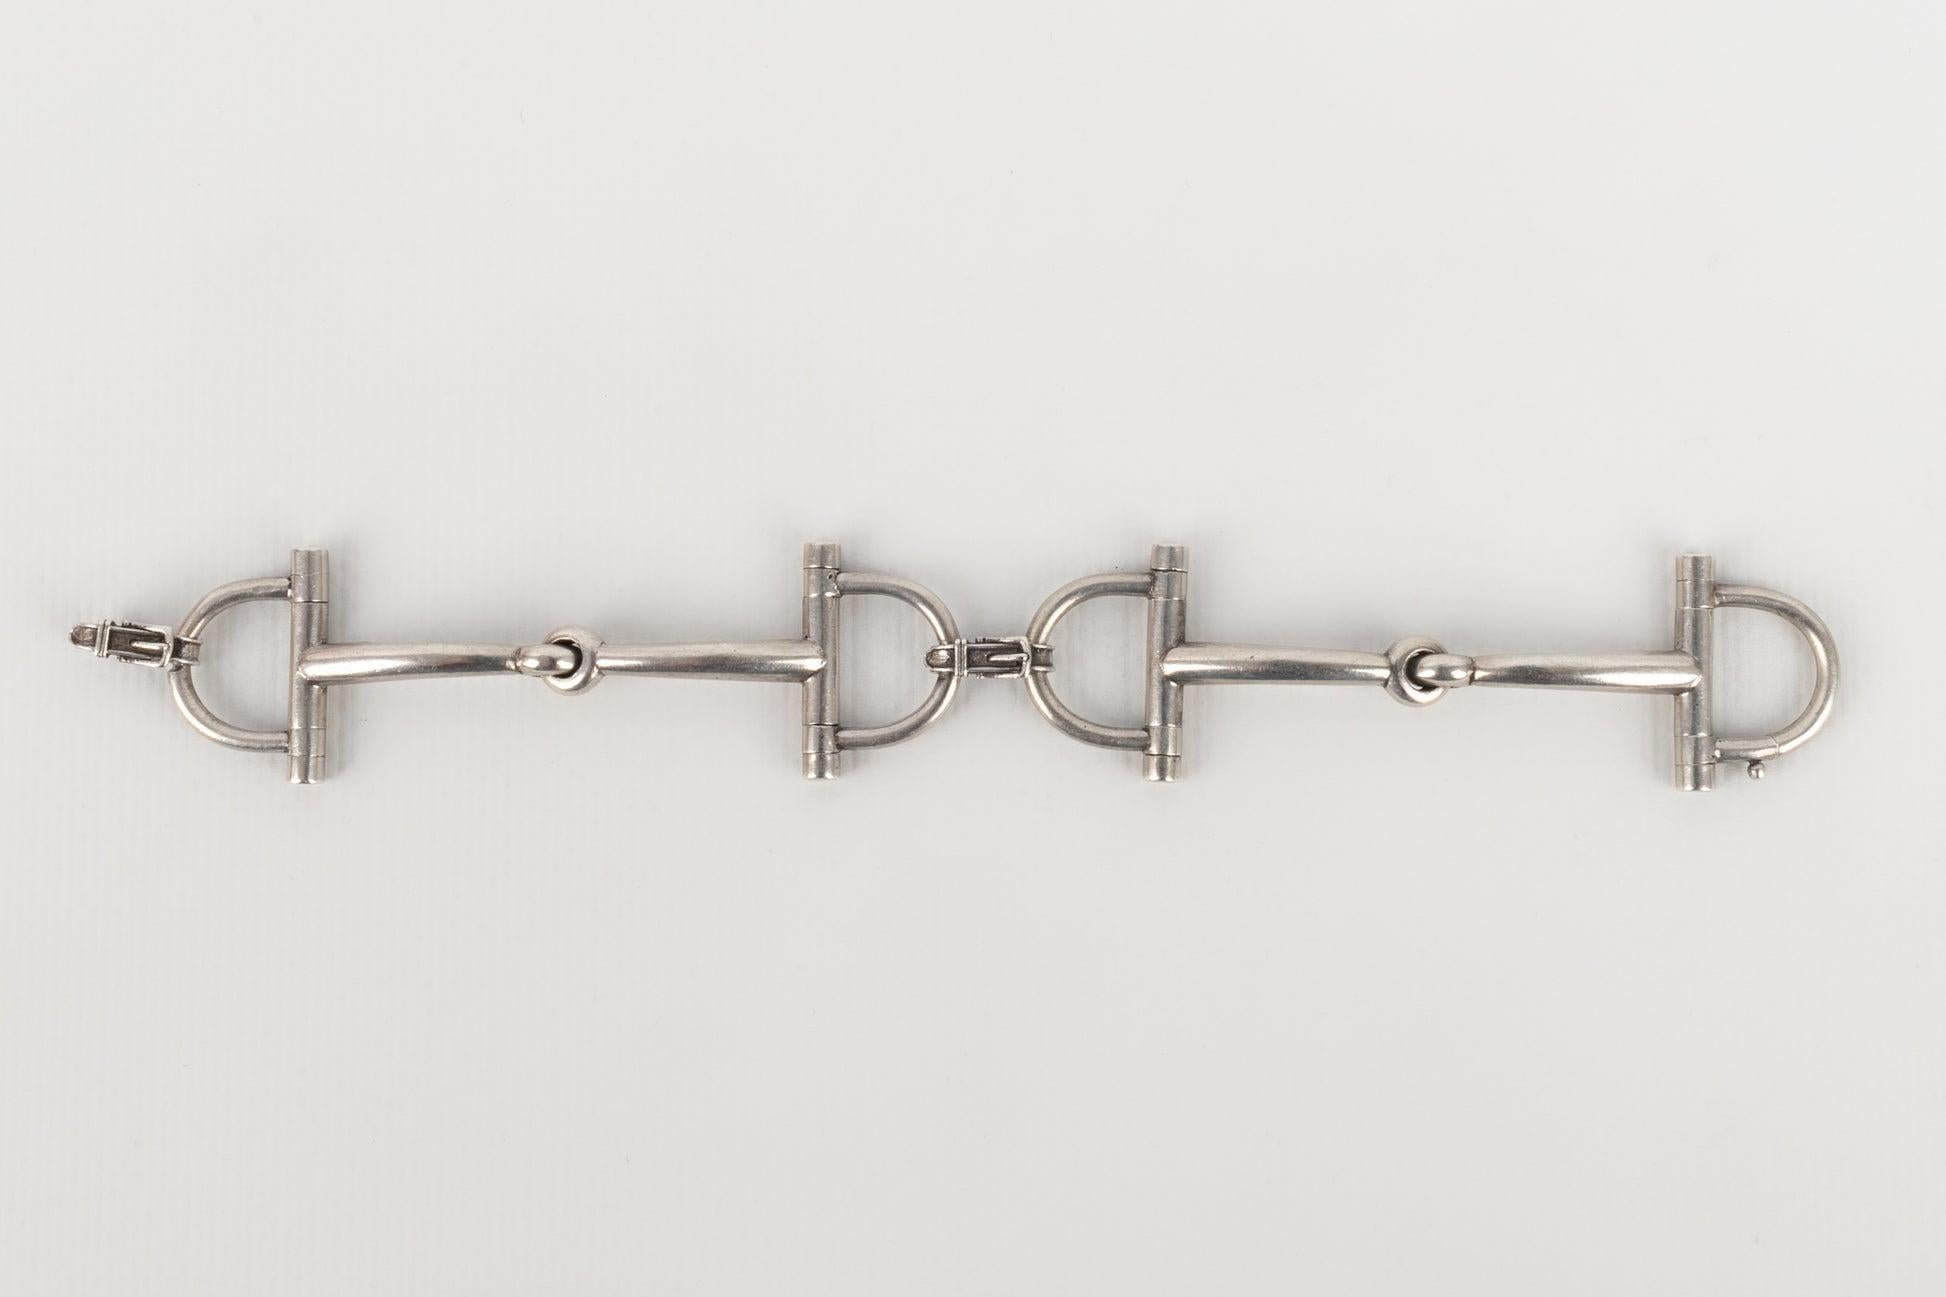 Hermès - Silver antique bracelet. Visible hallmark.

Additional information:
Condition: Very good condition
Dimensions: Length: 19 cm

Seller Reference: BRA71
